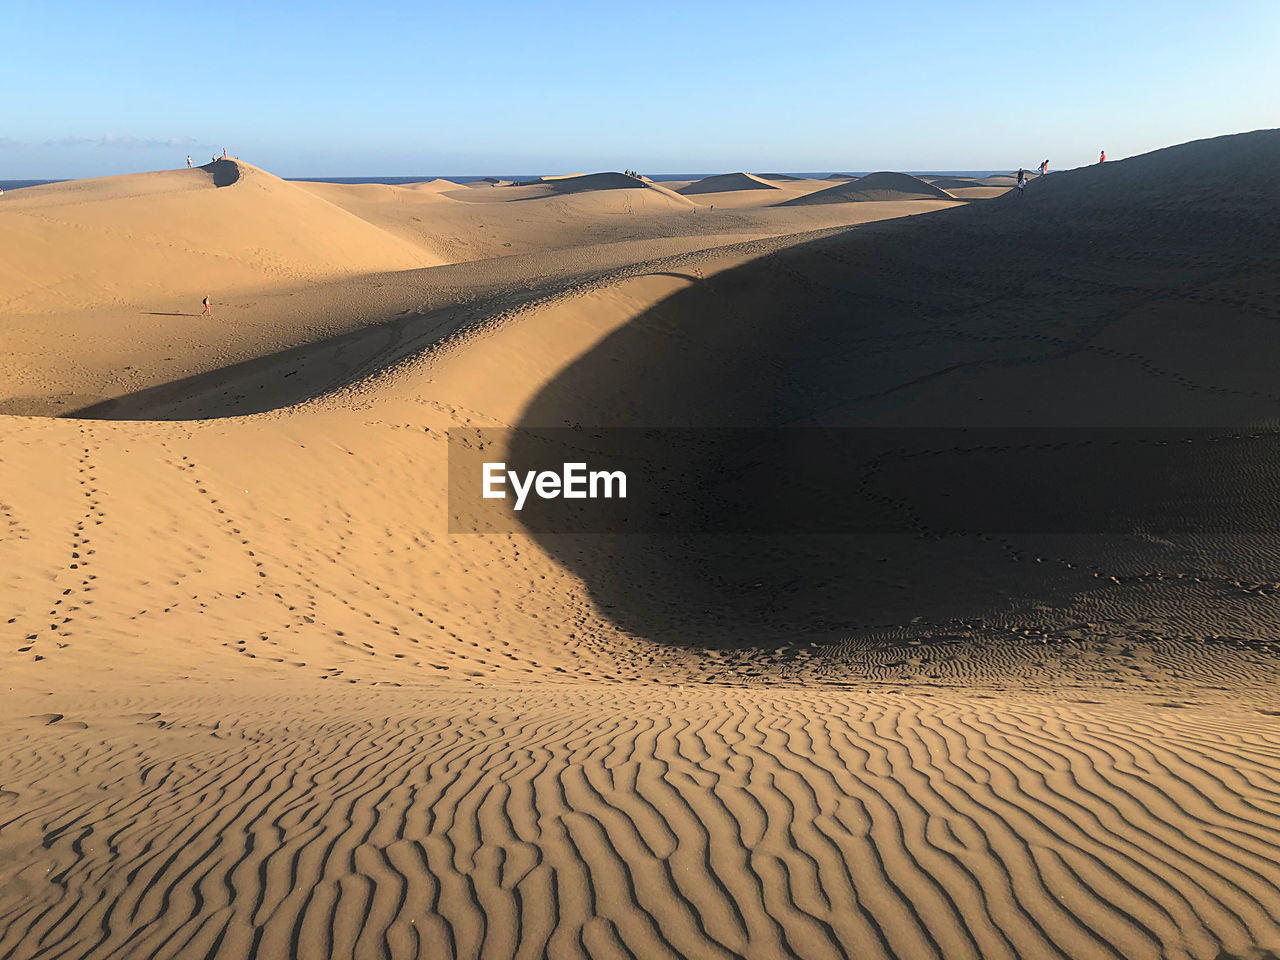 SCENIC VIEW OF SAND DUNE AGAINST CLEAR SKY